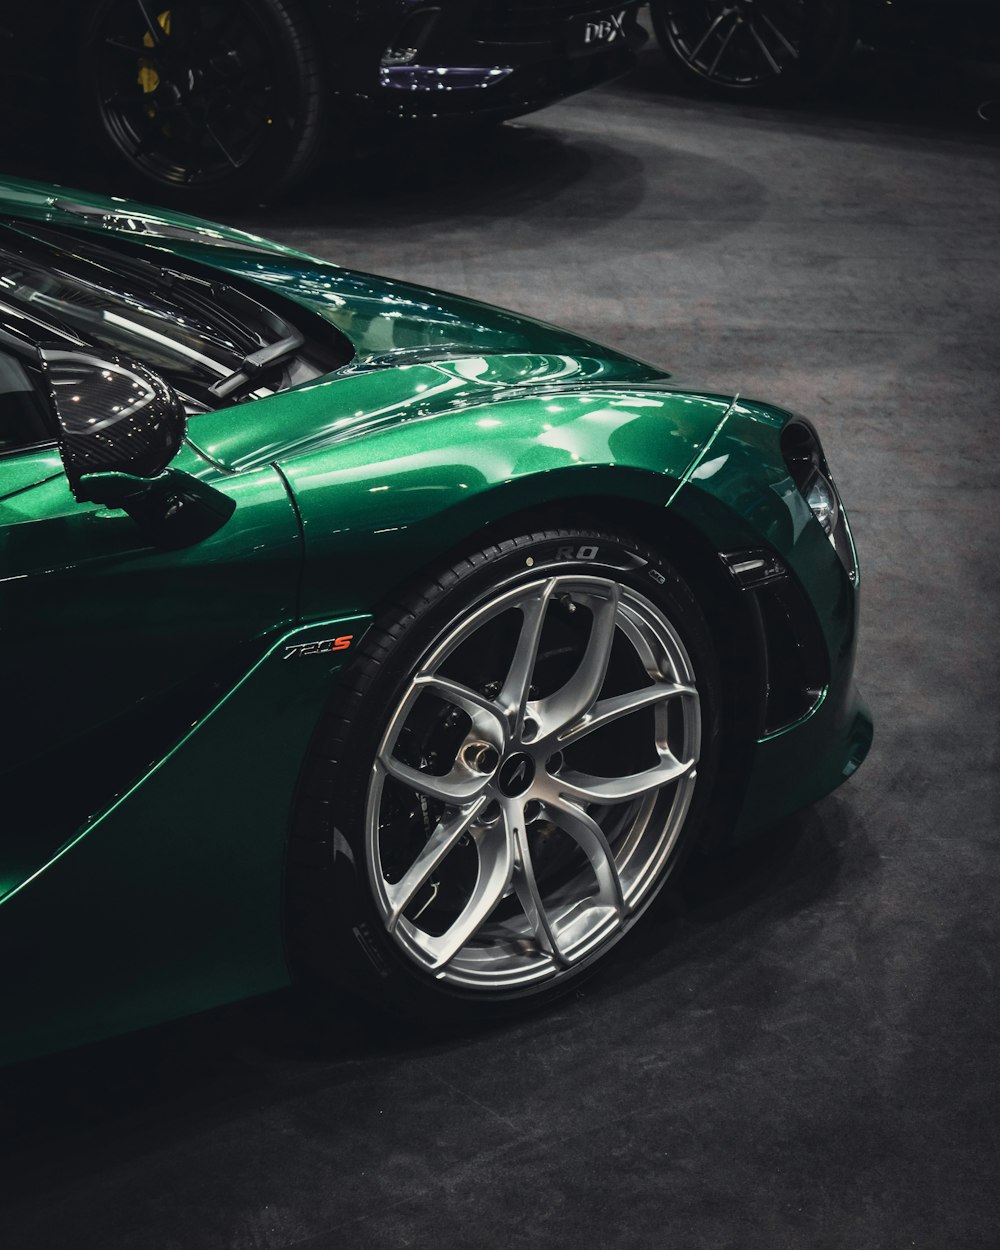 a green sports car parked in a showroom